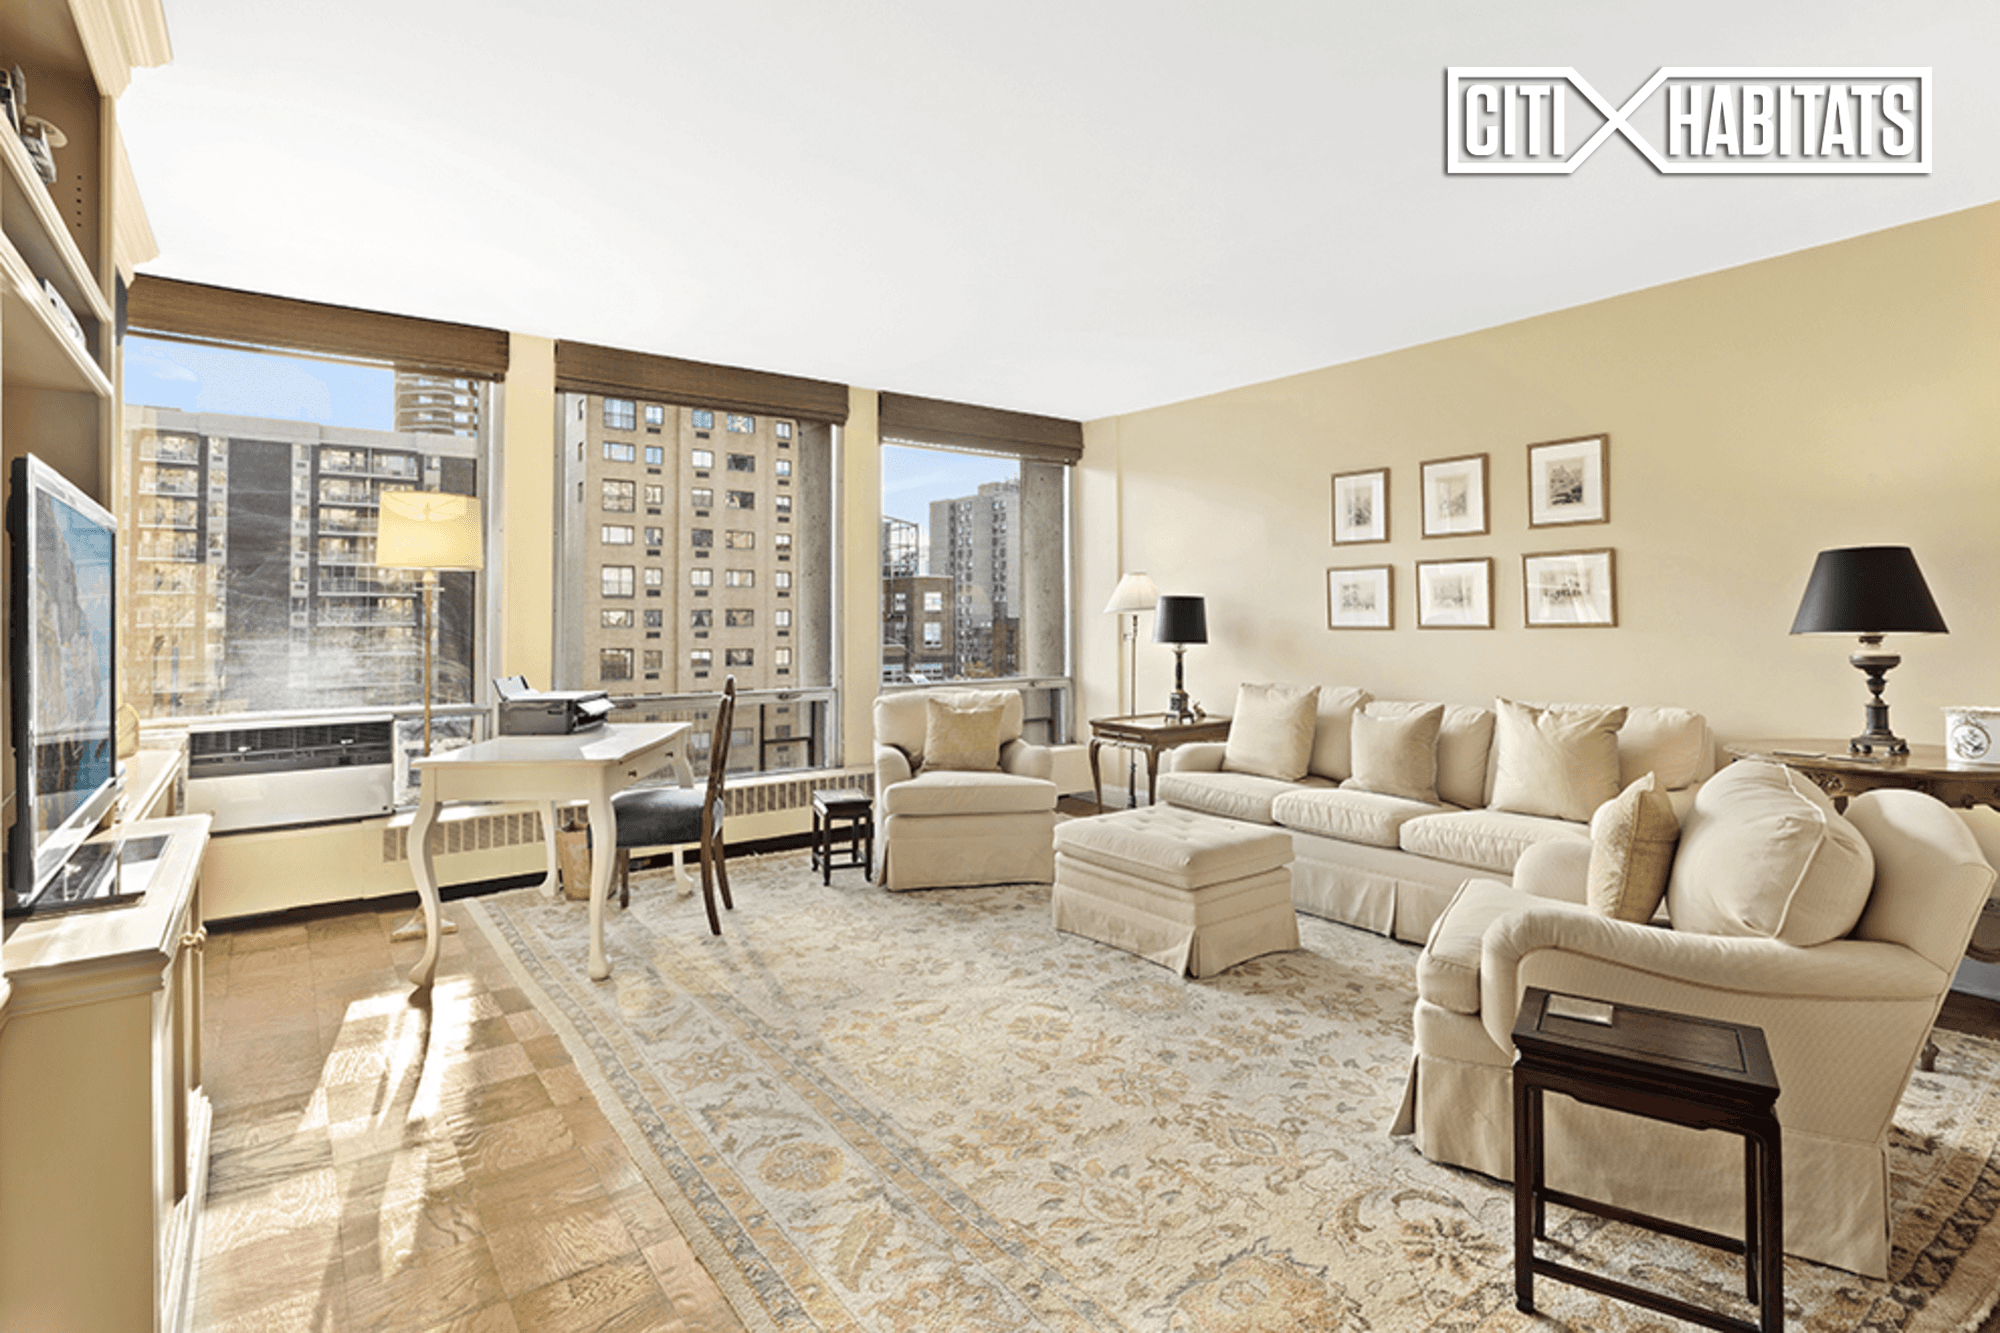 Thanks to its southern exposure, and a series of floor to ceiling windows that span the width of the apartment, this one bedroom condominium is flooded with sunlight.